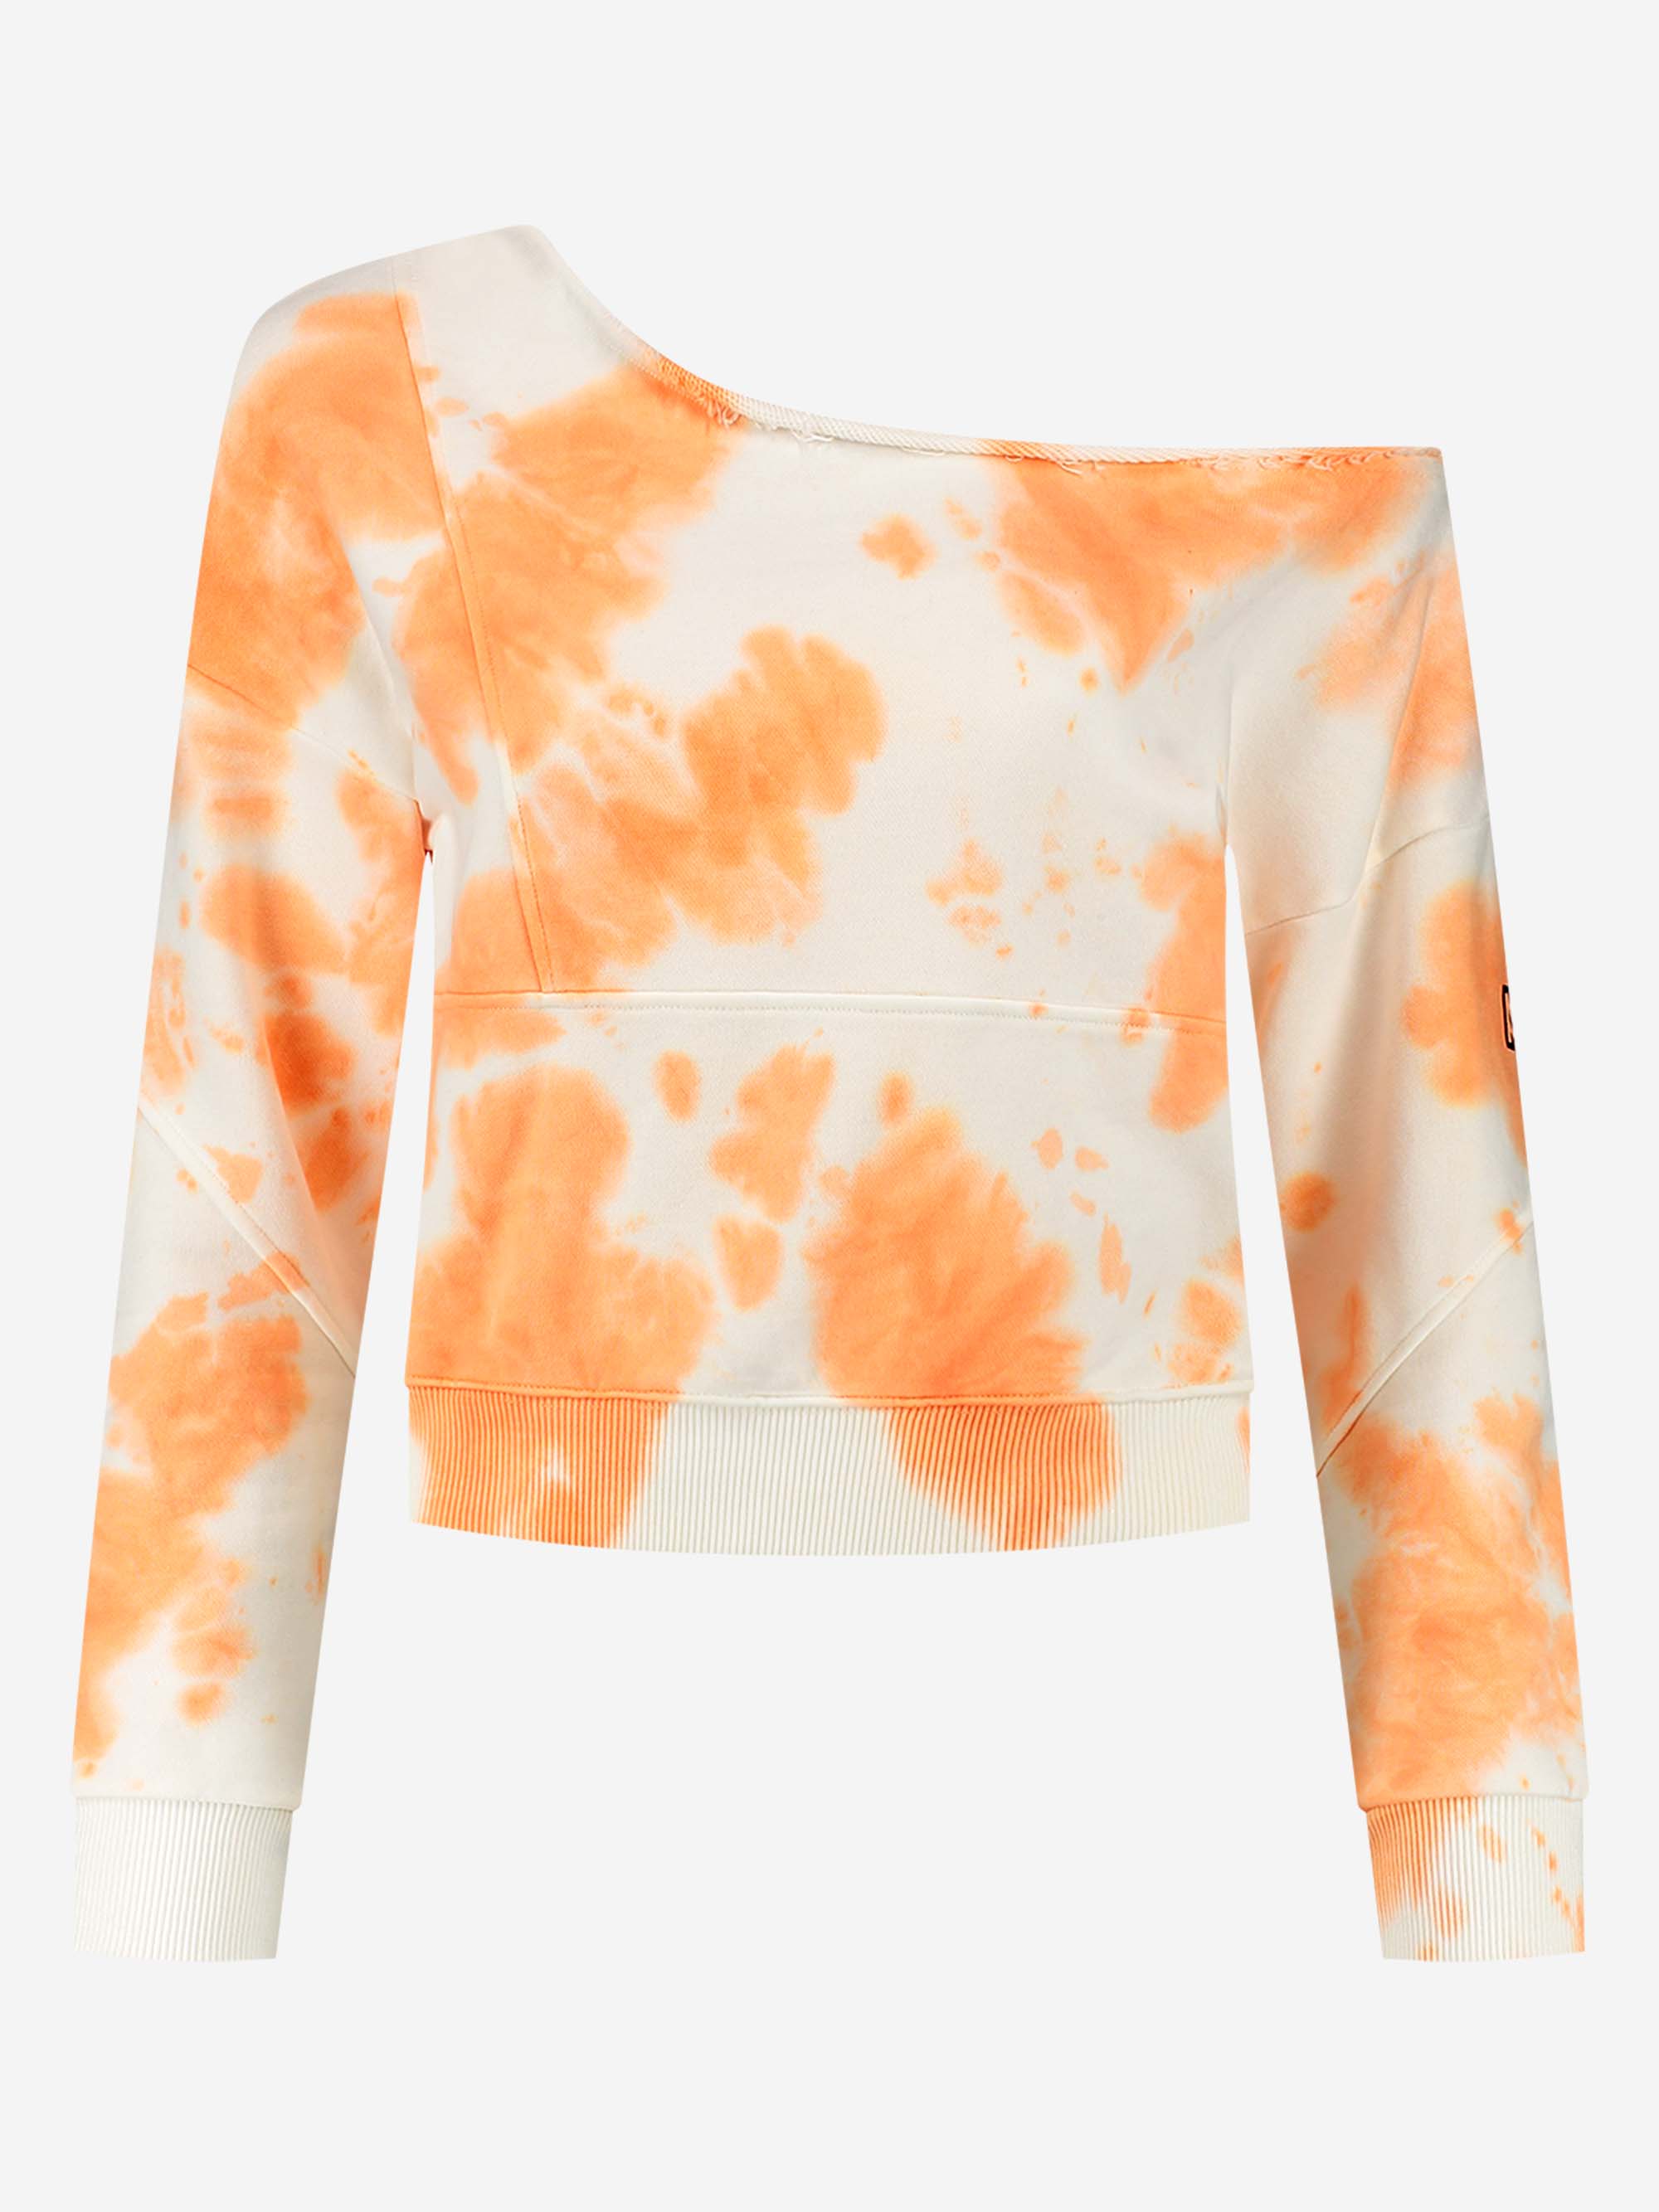  Off shoulder sweater with tie dye print